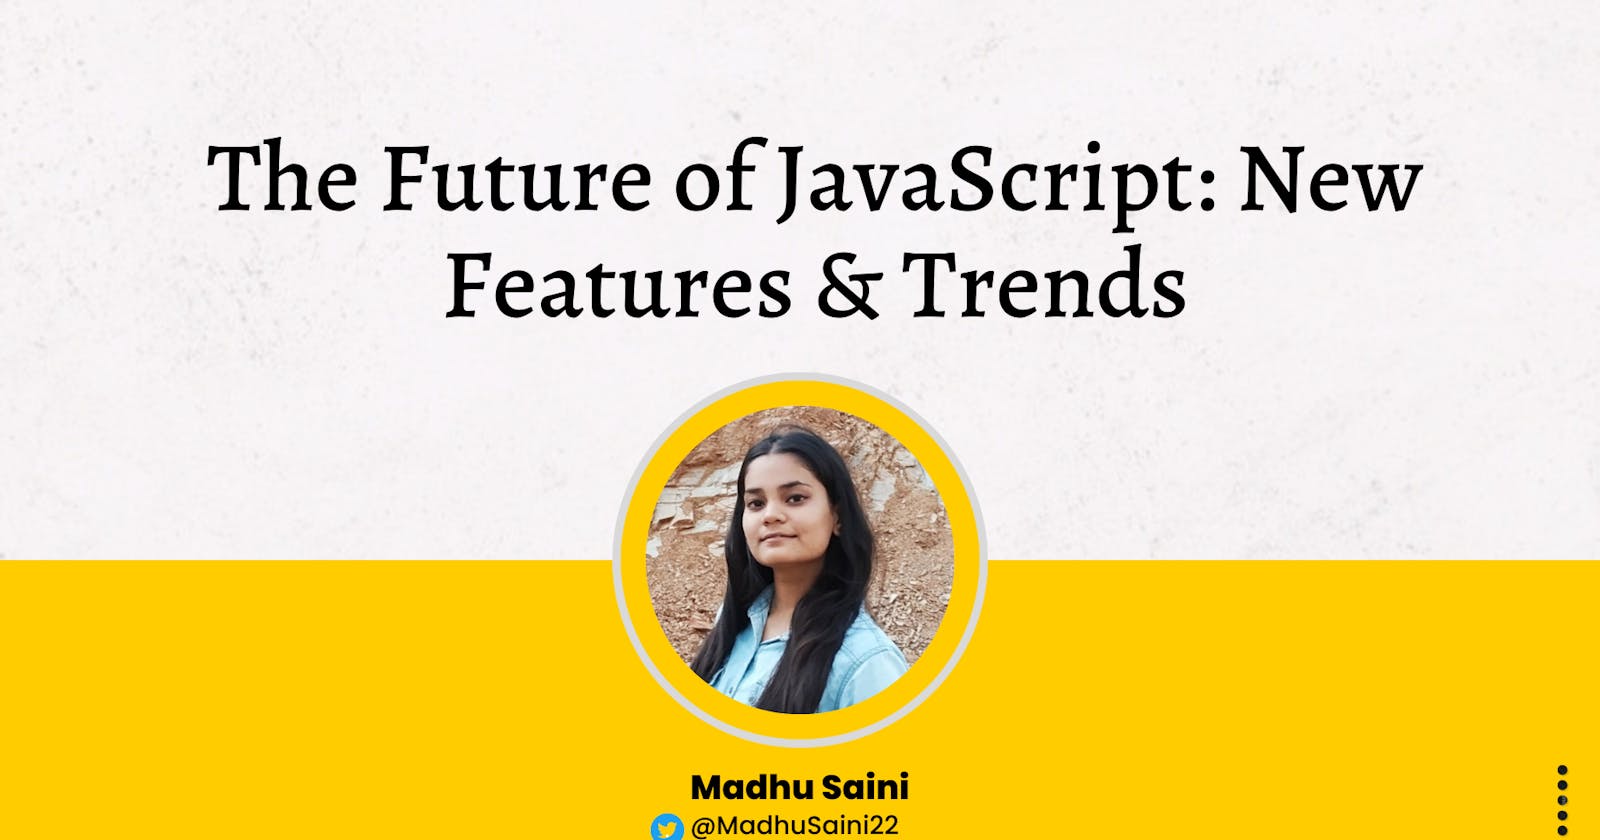 The Future of JavaScript: New Features & Trends